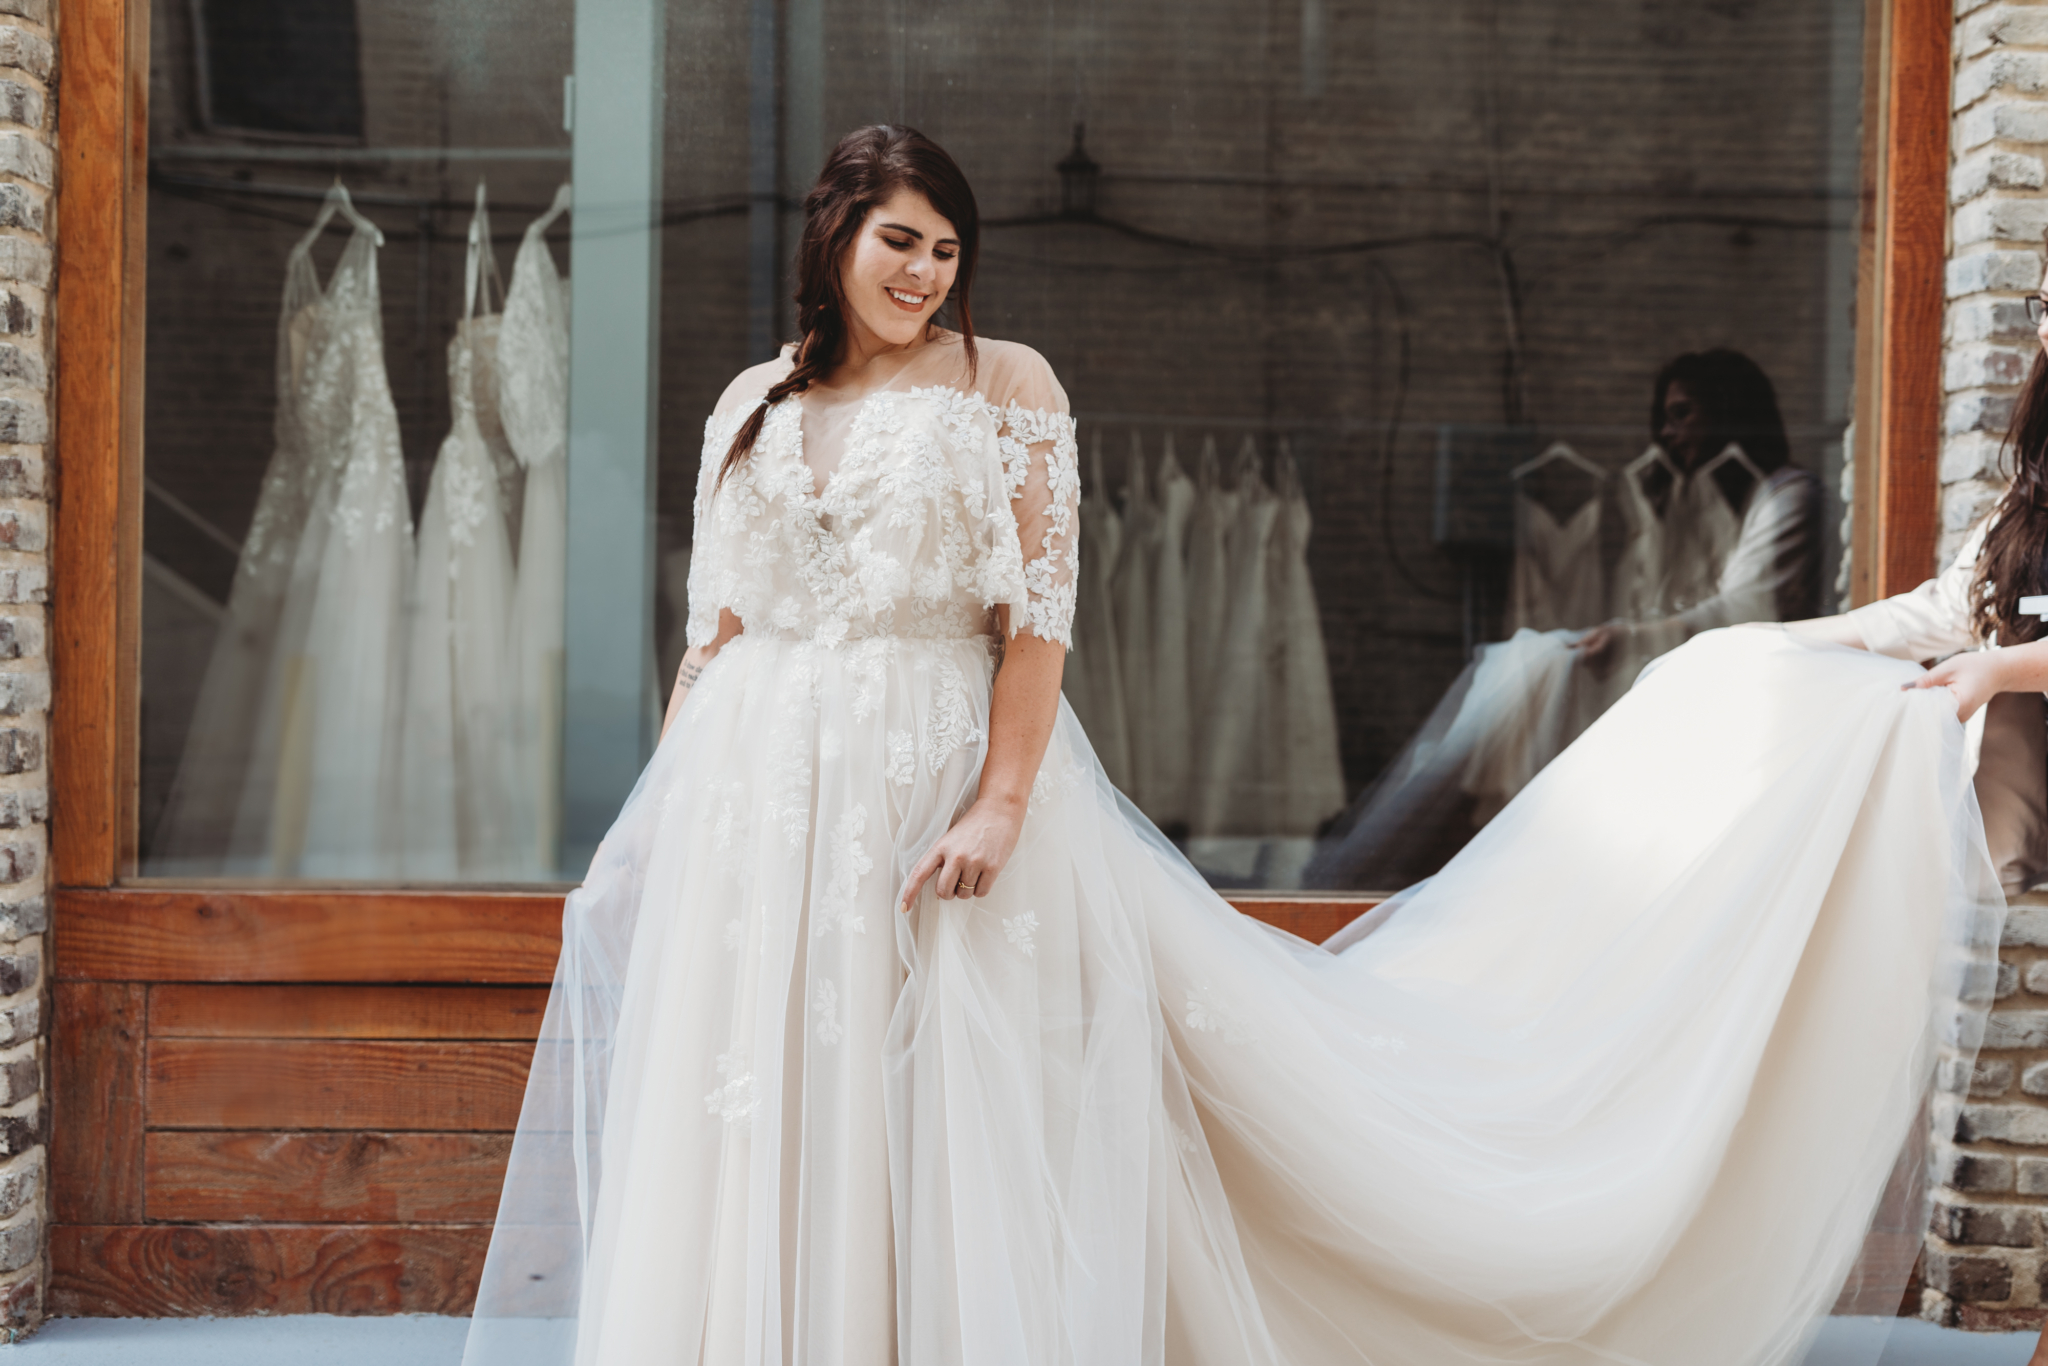 Meet one local photographer who’s off to Chicago + New York soon to model wedding dresses